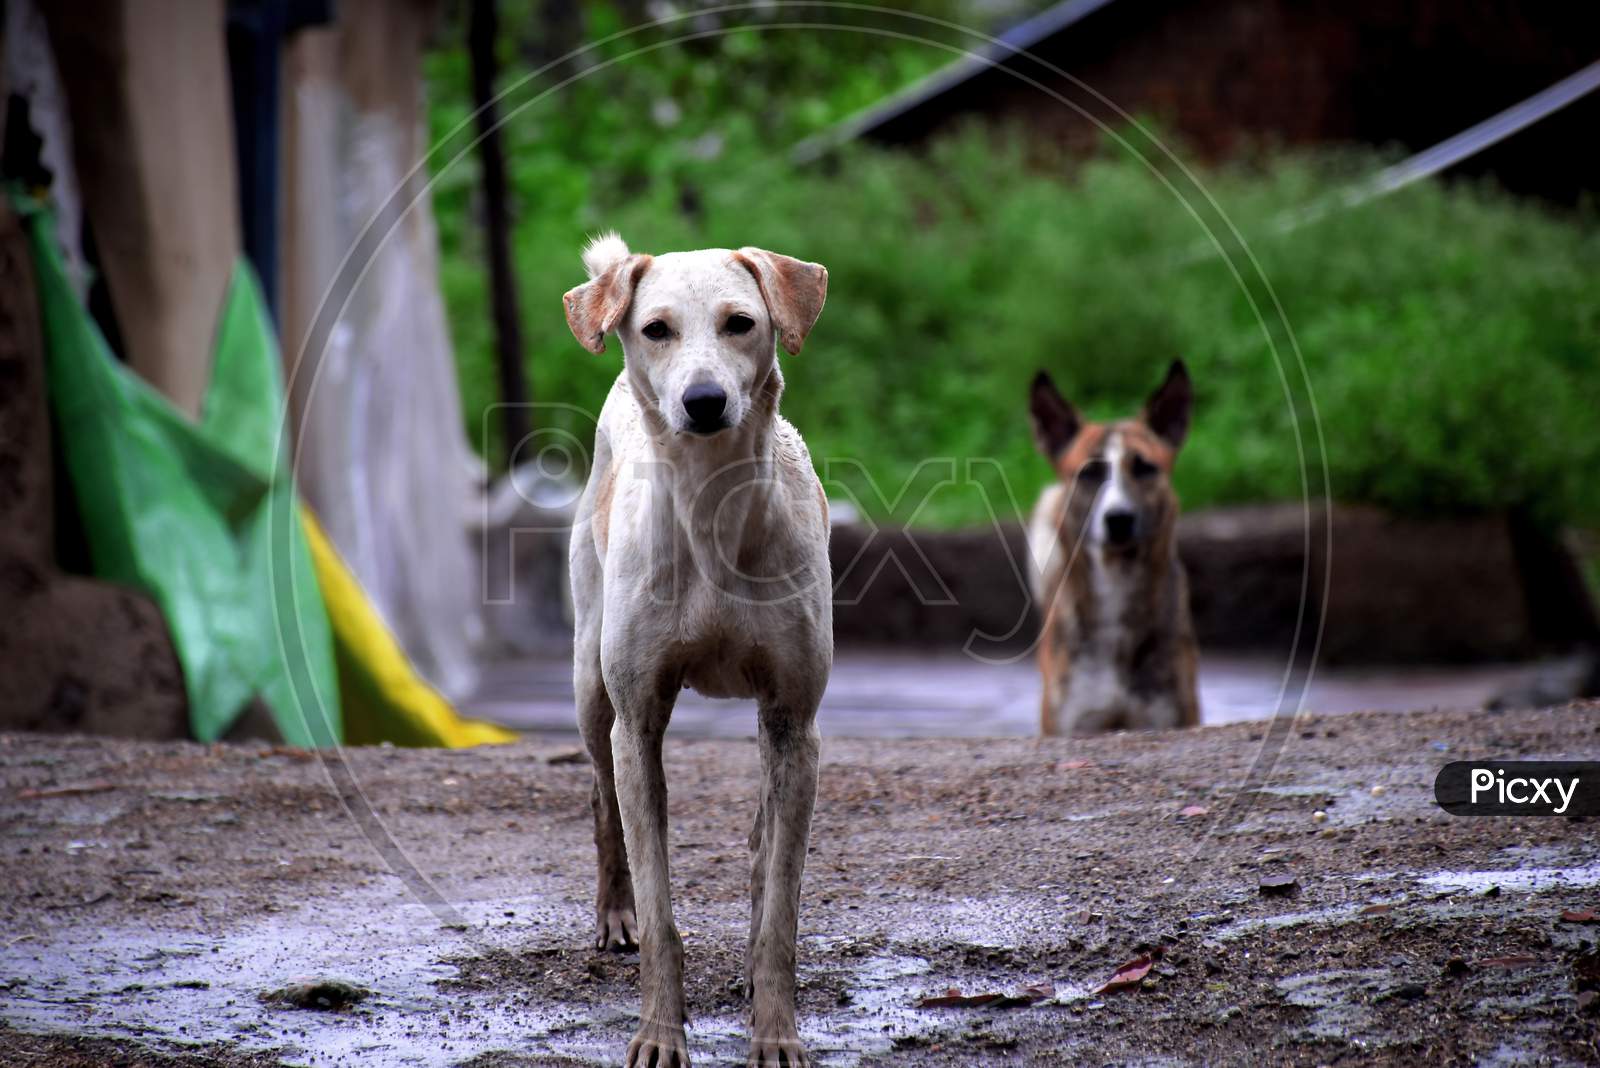 Two Stray Dogs Looking At The Camera, In The Rainy Village.